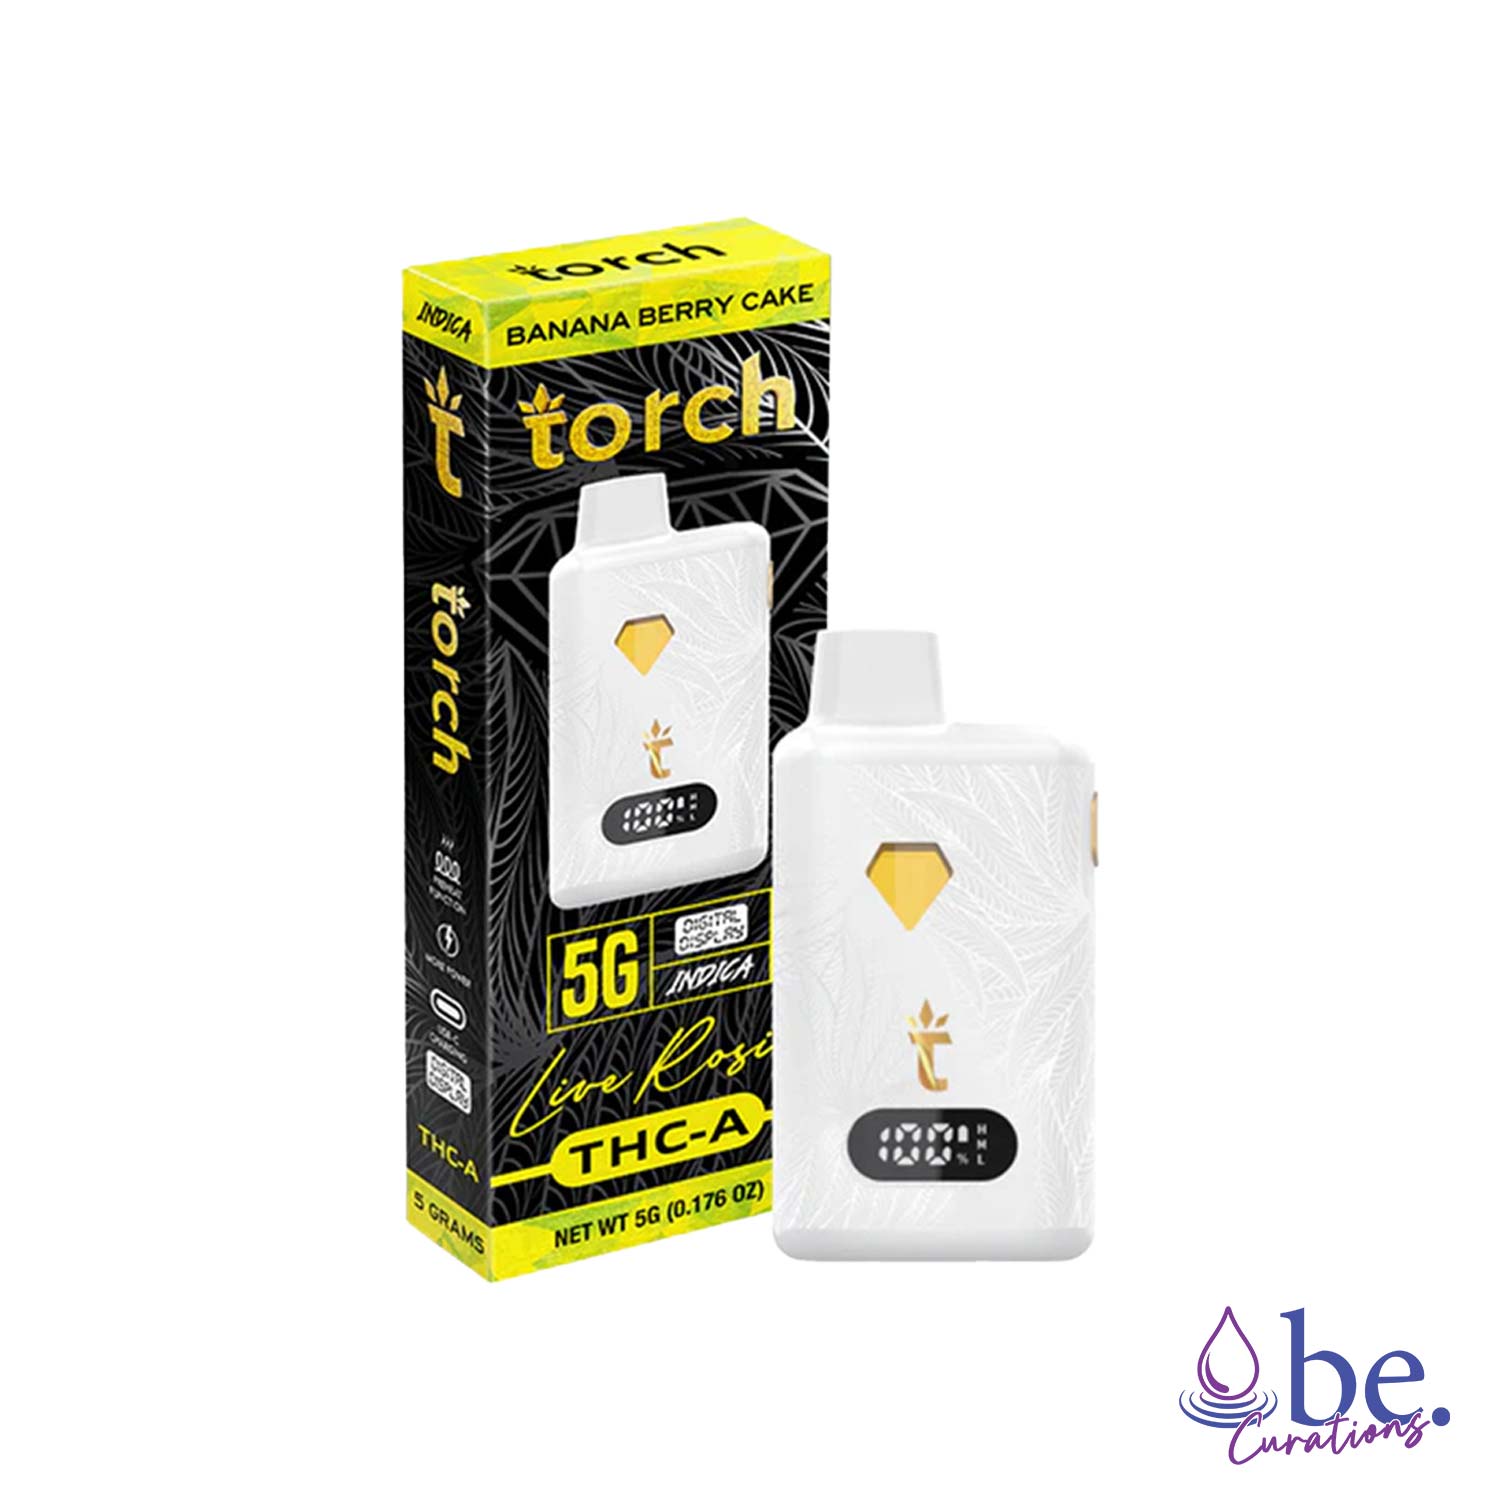 Torch Delta THC-A + Live Rosin Disposable Vape Device 5G - Banana Berry Cake (Indica) |